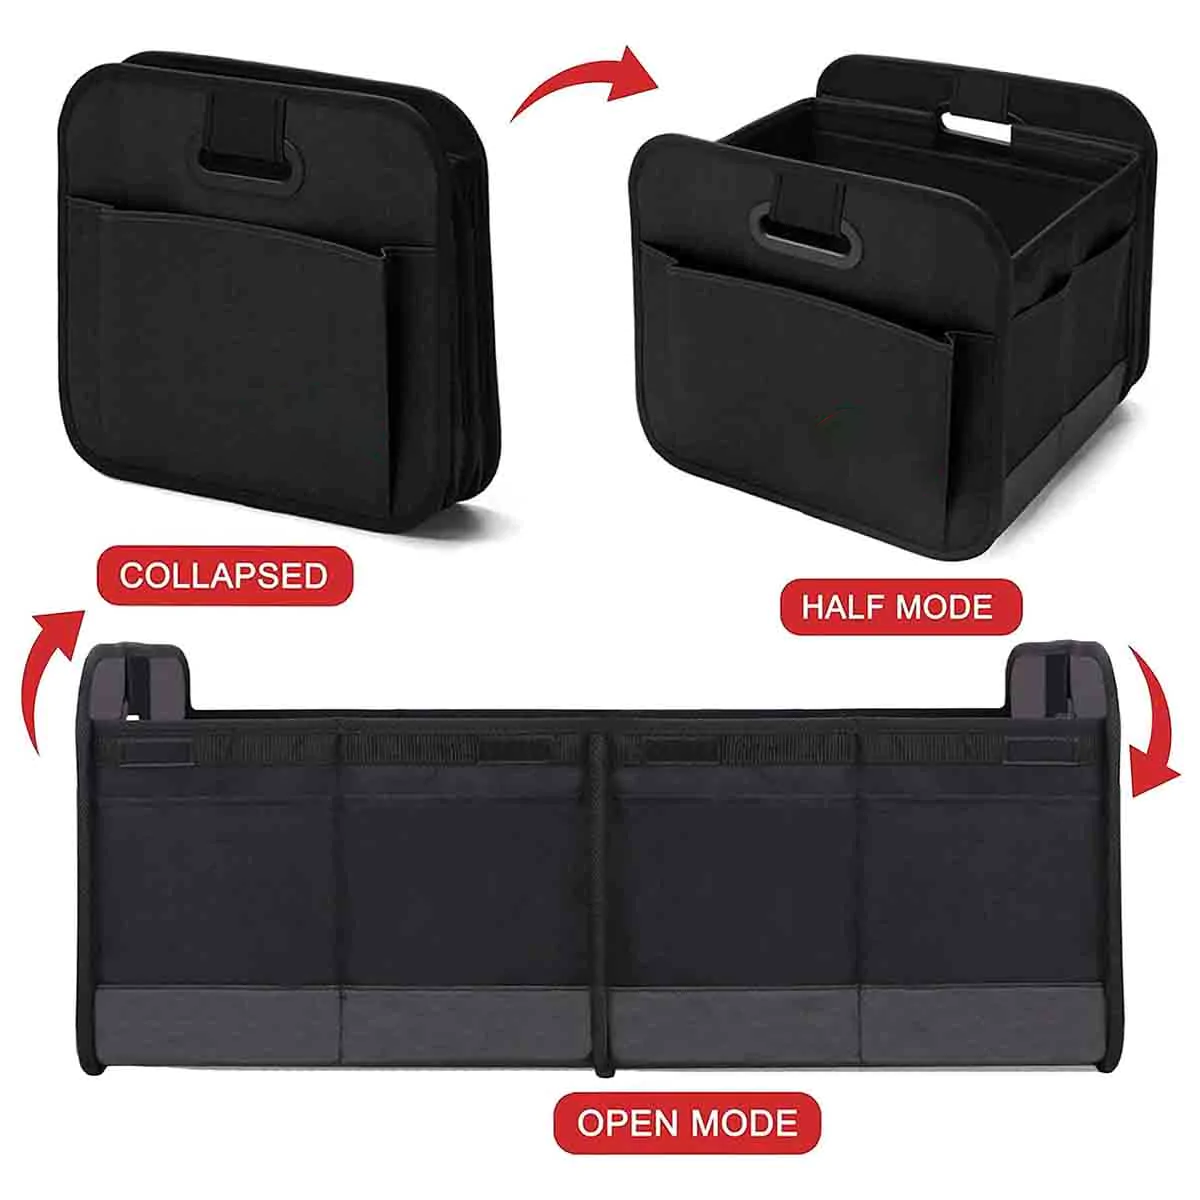 Custom Text For Car Trunk Organizer Storage, Compatible with All Cars, Reinforced Handles, Collapsible Multi, Compartment Car Organizers, Foldable and Waterproof, 600D Oxford Polyester VE12995